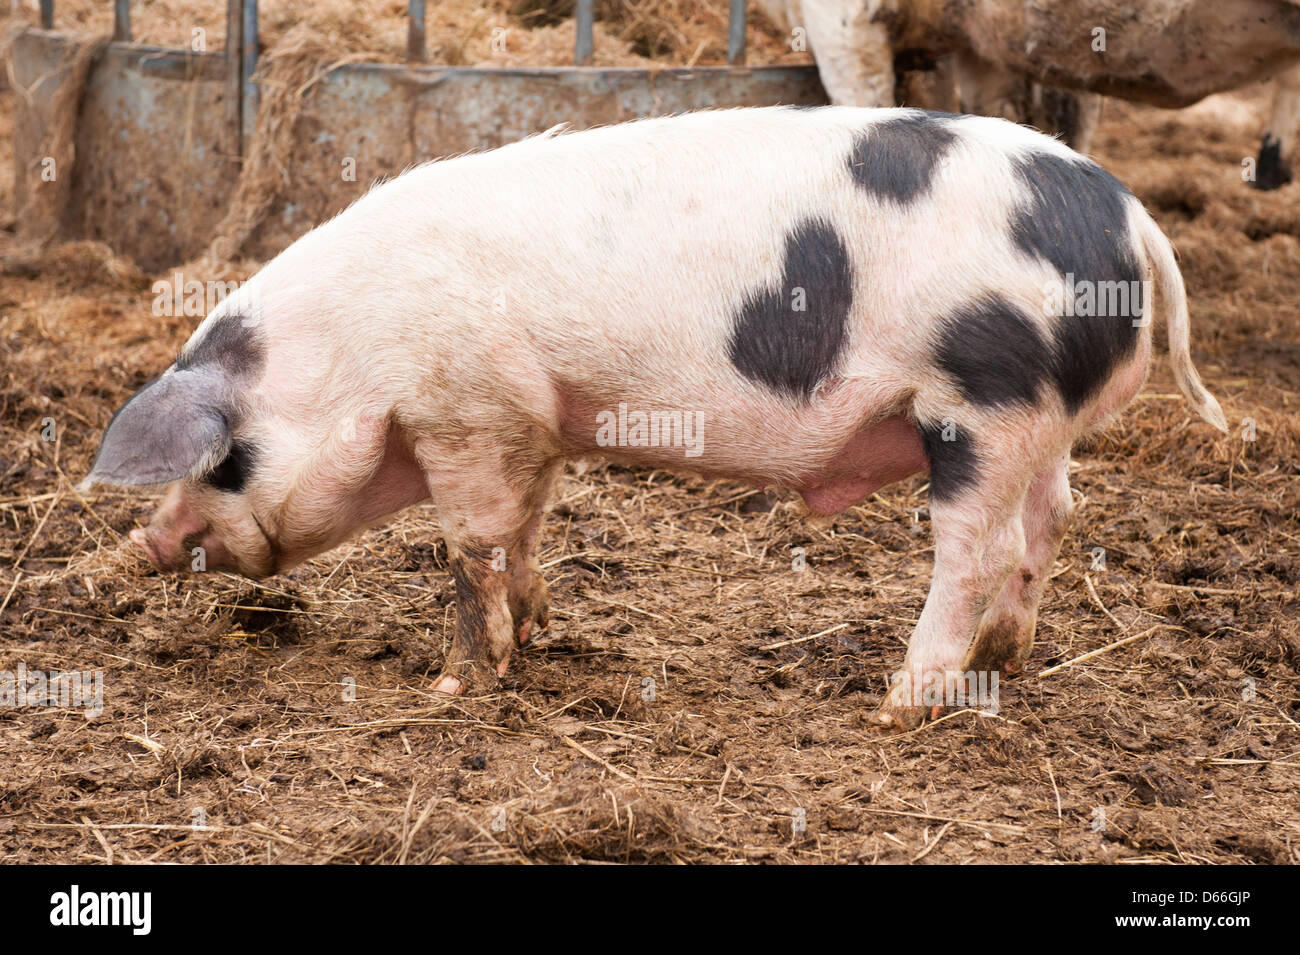 Vowley Farm Royal Wootton Bassett Wilts English Gloucester Old Spot pig pigs hog hogs sow sows Stock Photo